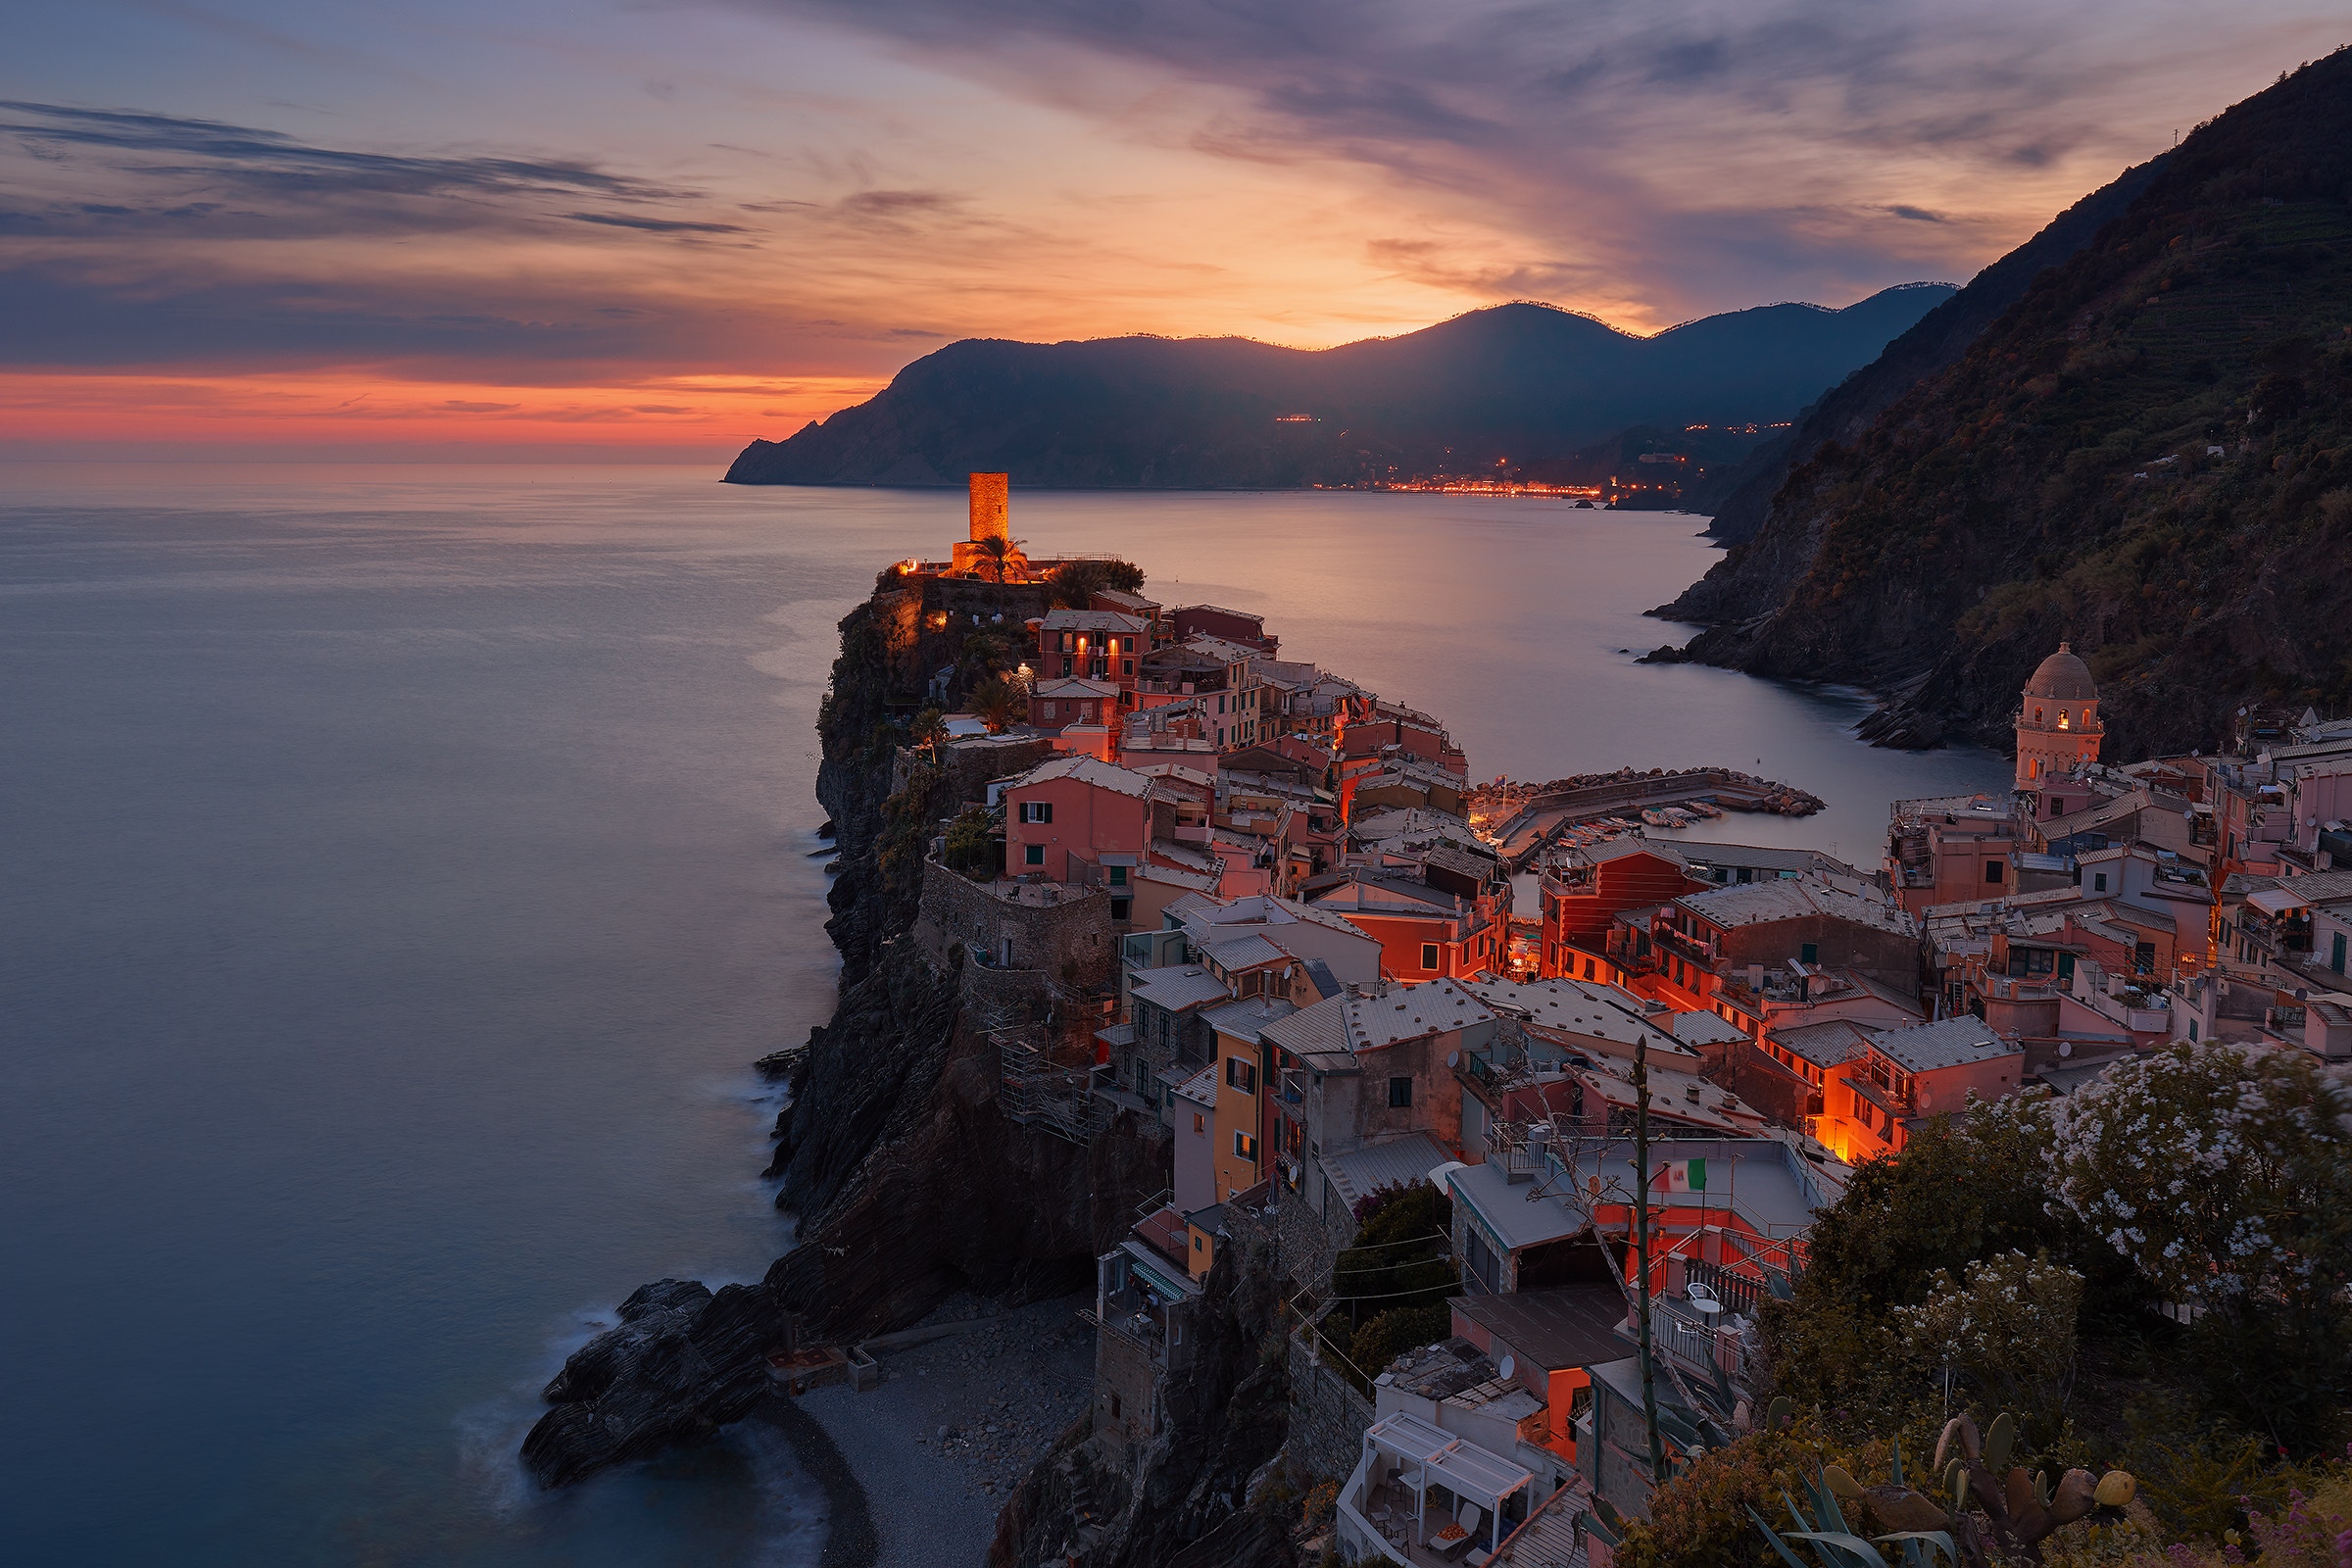 italy, vernazza, cities, sunset, mountains, sea, buildings